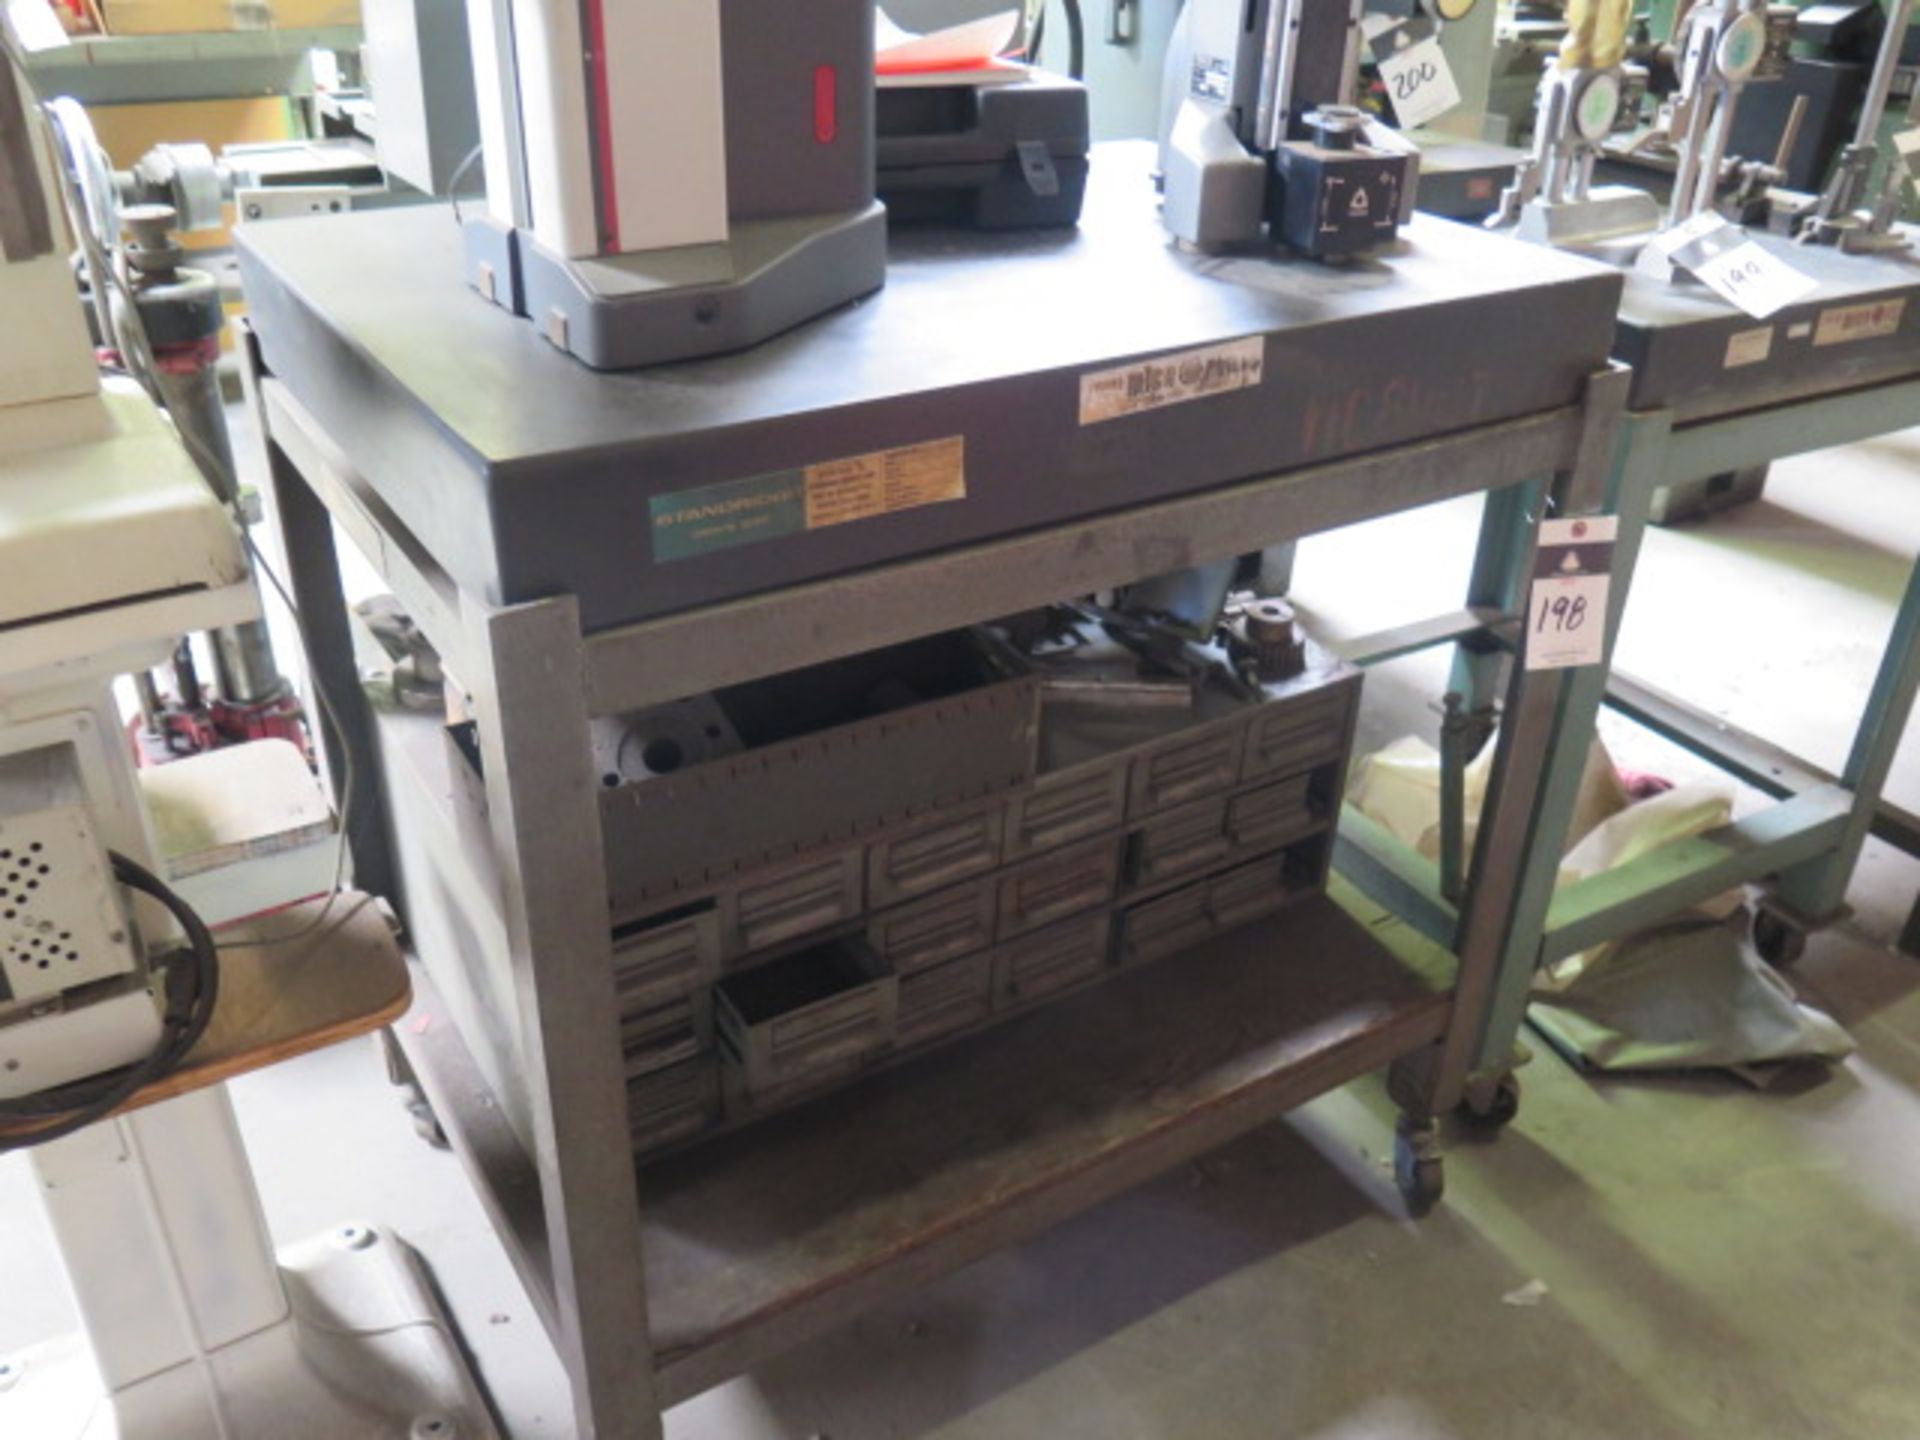 Mictoflat 24" x 36" x 4" Granite Surface Plate w/ Roll Stand and Parts Cabinet w/ Misc Tooling (SOLD - Image 2 of 4